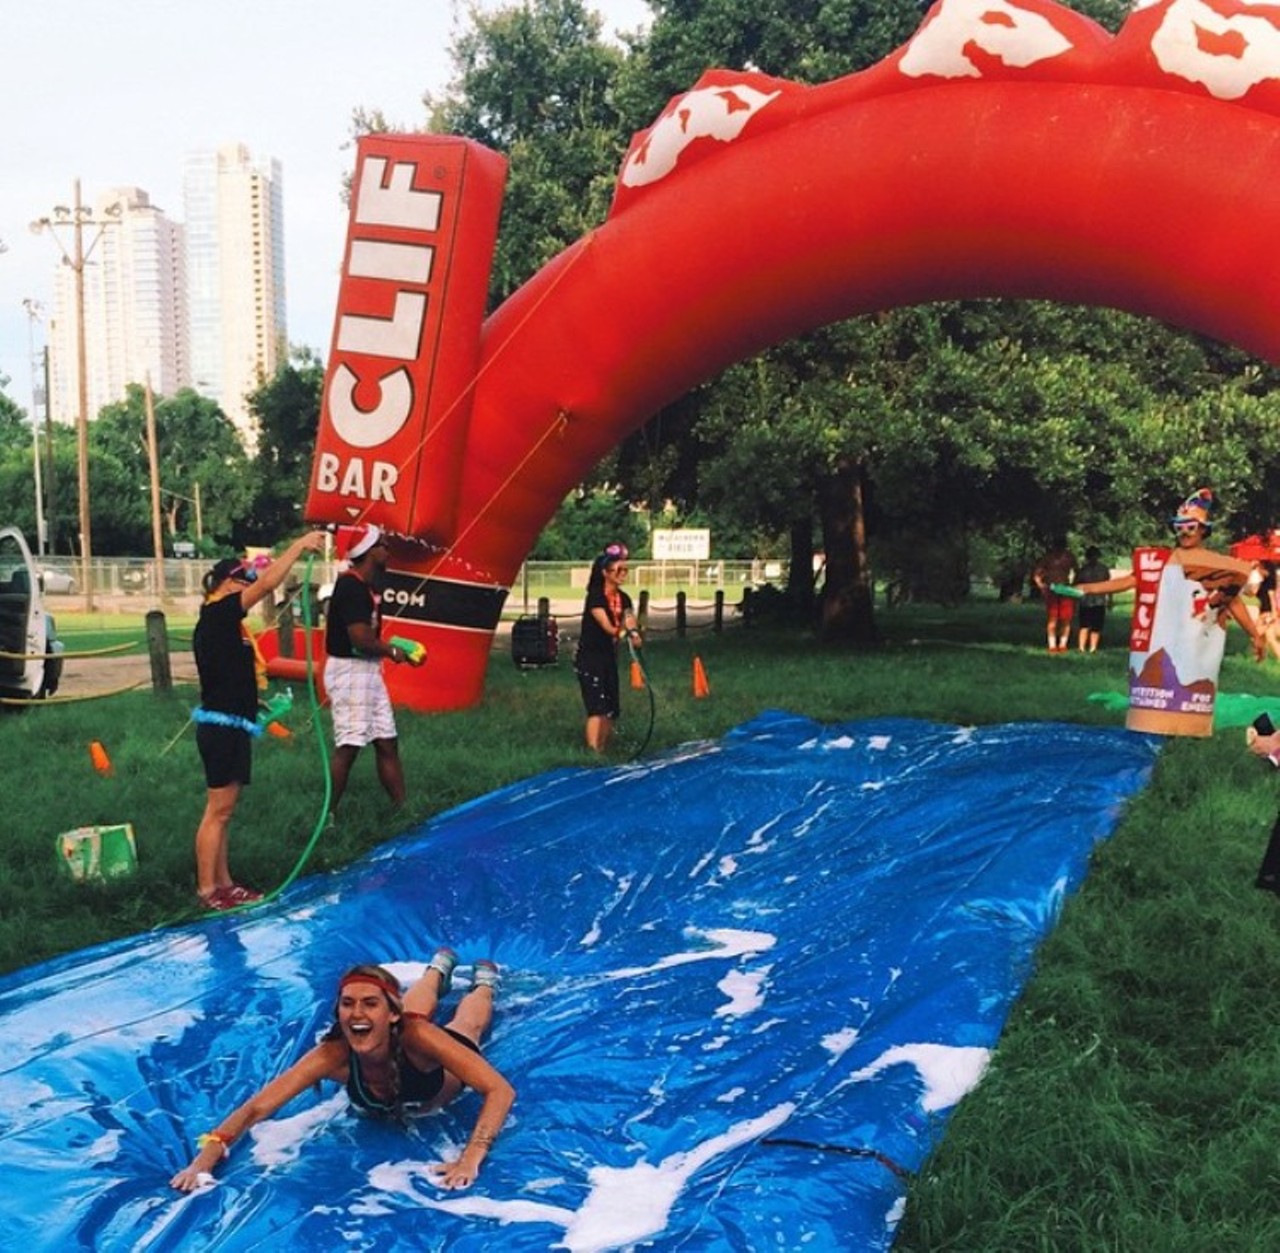 Fun Stop 5K & Fest
$31, Sat Jun 23, Auditorium Shores, 800 W Riverside Dr, Austin, (512) 524-2945, funstop5k.com
Formerly known as Keep Austin Weird Fest, this athletic event allows runners to stop at puppy kissing booths, foam pits and even a donut shop. Runners are encouraged to dress up in their wackiest costumes and enjoy alcoholic beverages along the course.
Photo via Instagram / paigejwagner